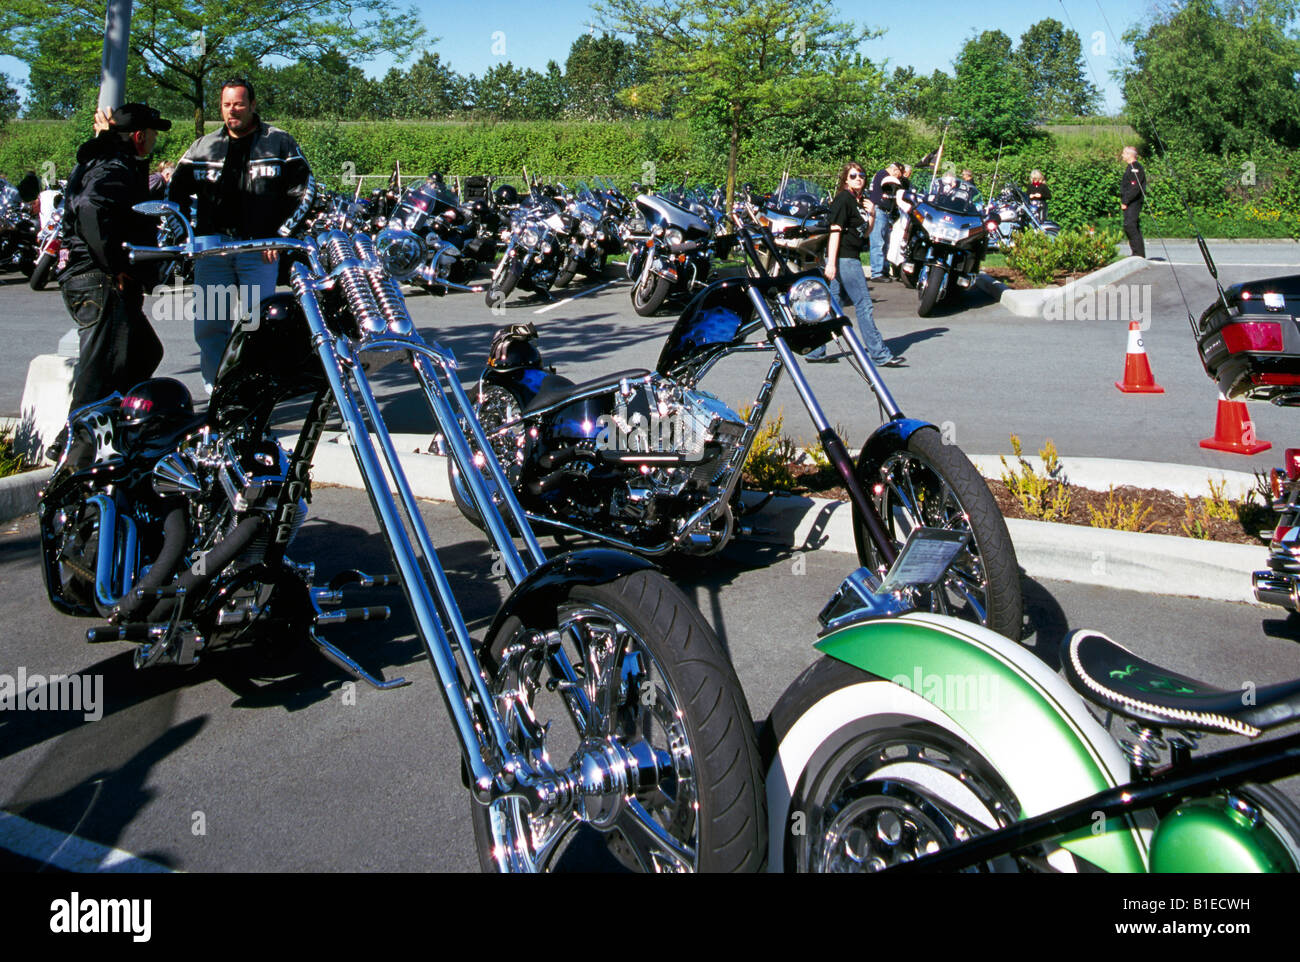 Canada's Motorcycle Ride for Dad to fight Prostate Cancer held in Vancouver British Columbia Canada - May 31, 2008 Stock Photo